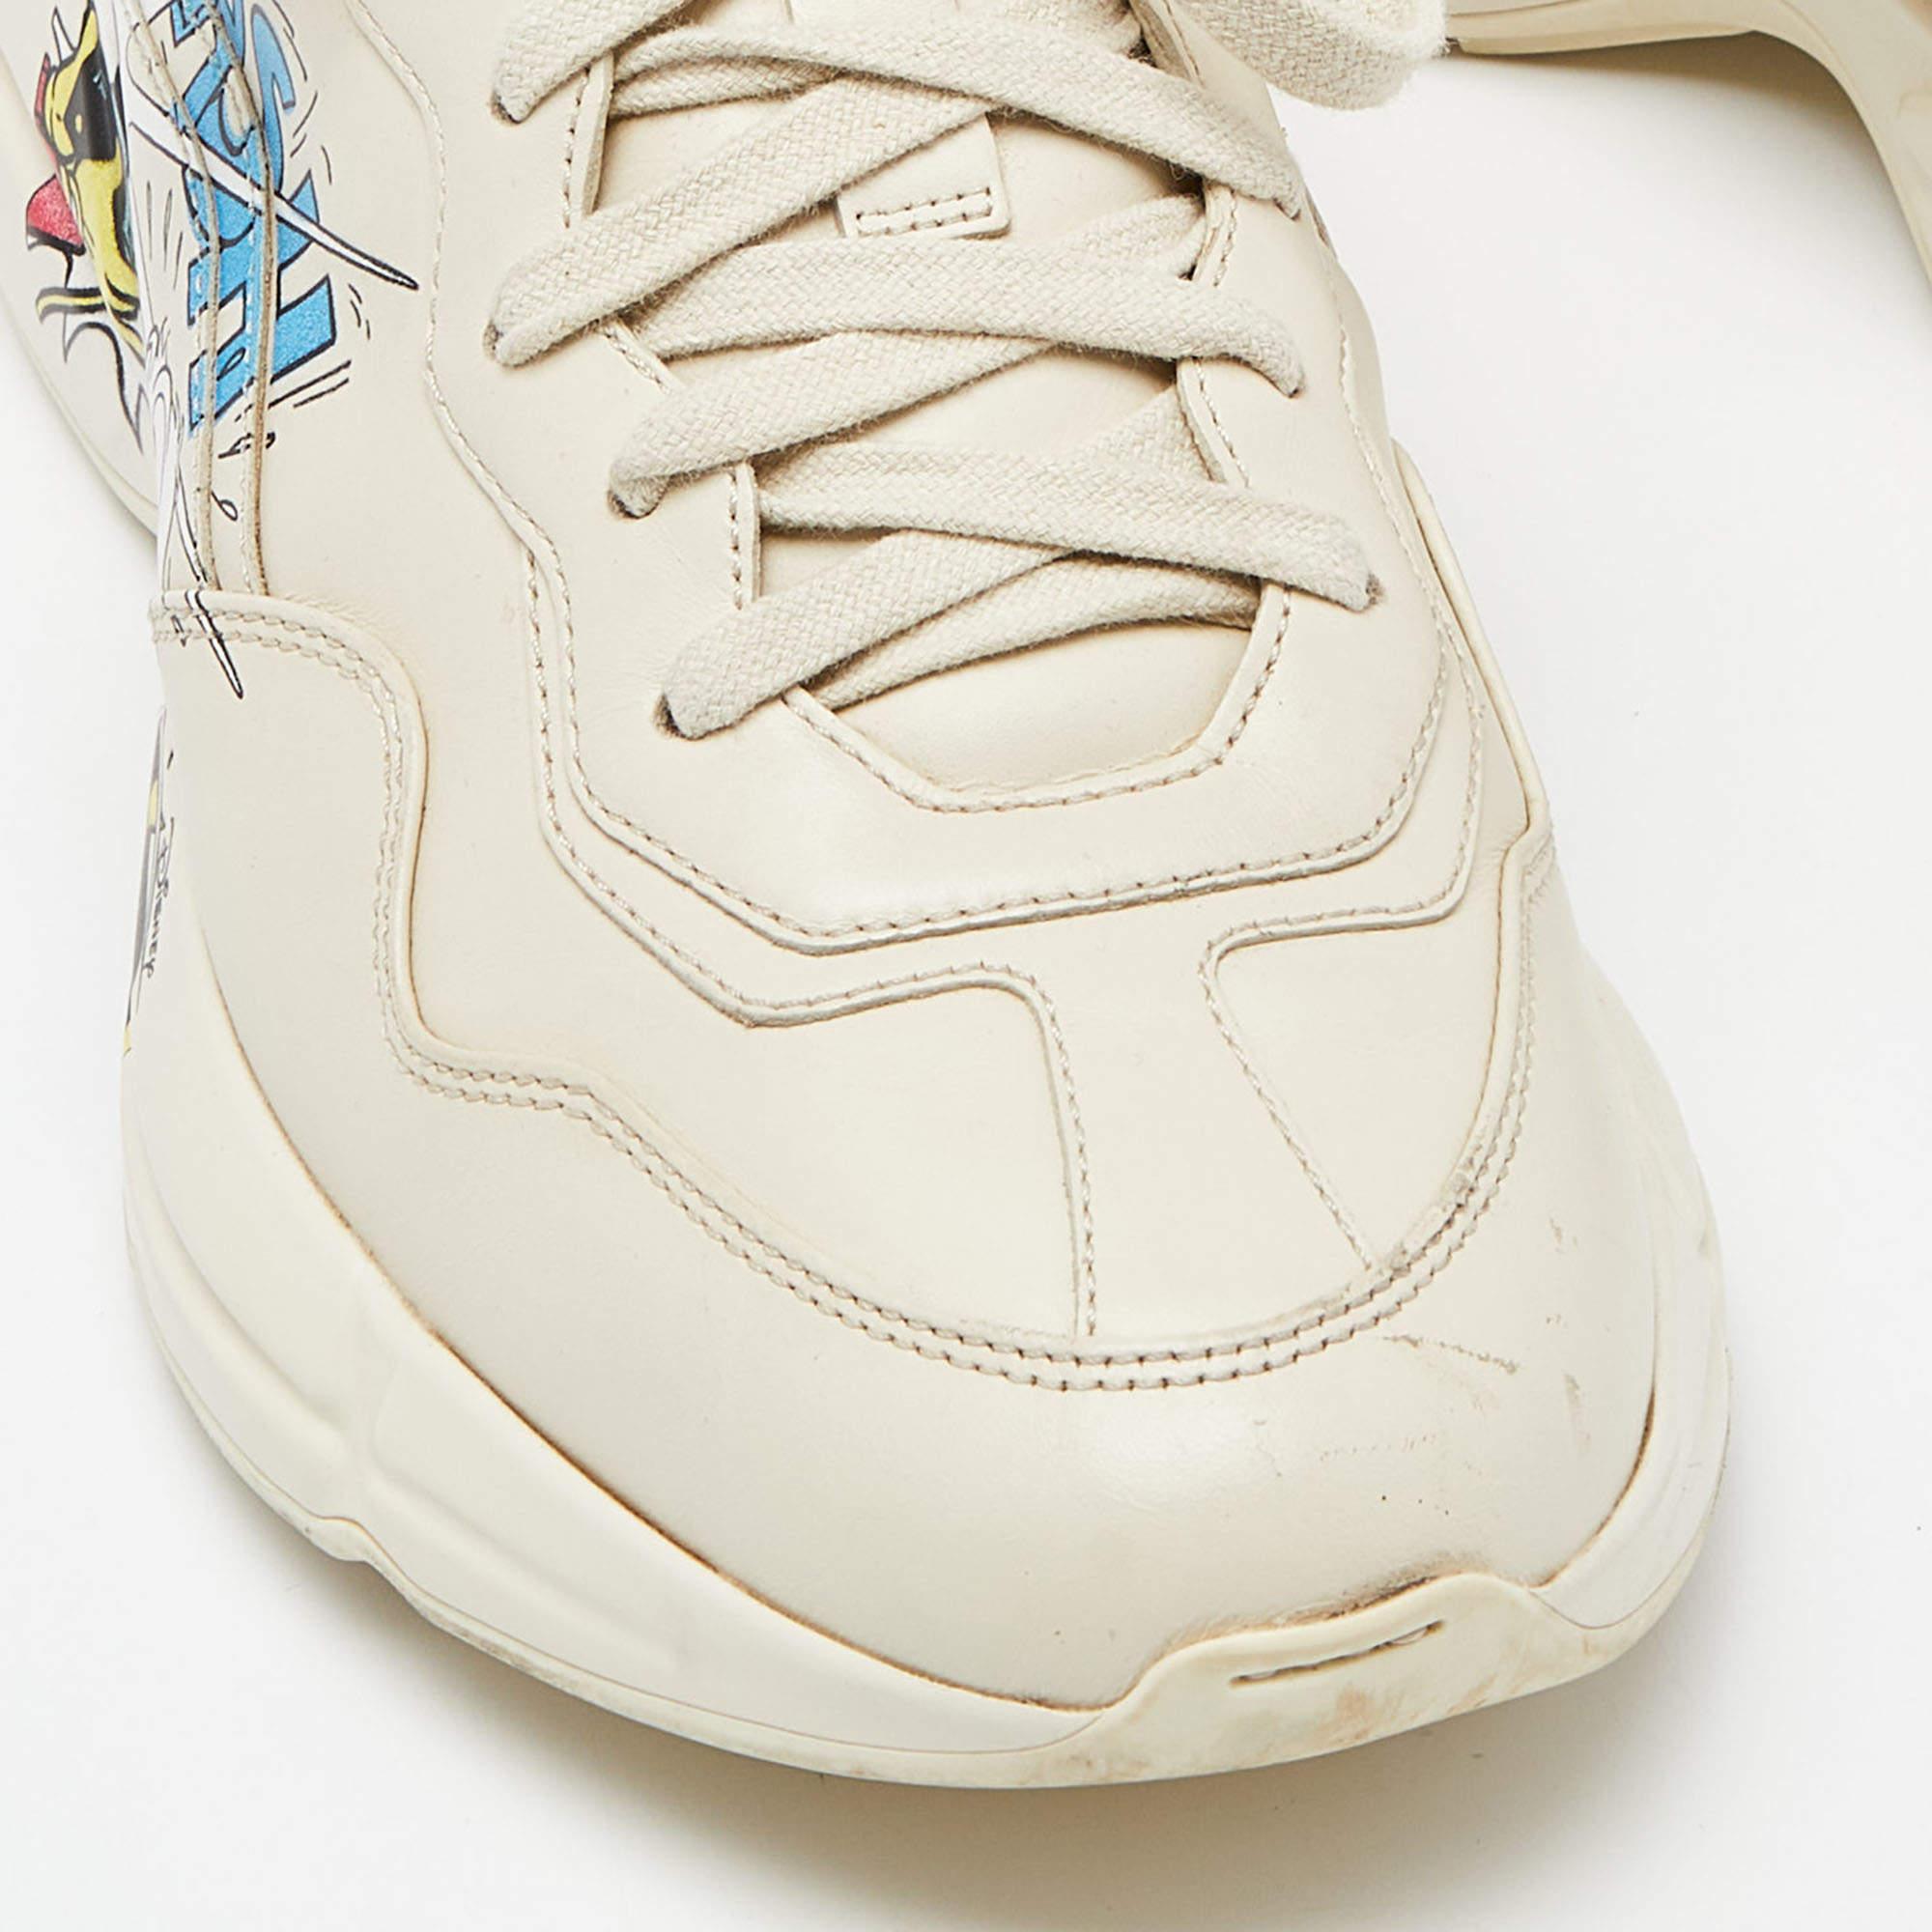 Gucci x Disney Donald Duck Cream Leather Rhyton Sneakers Size 38 3